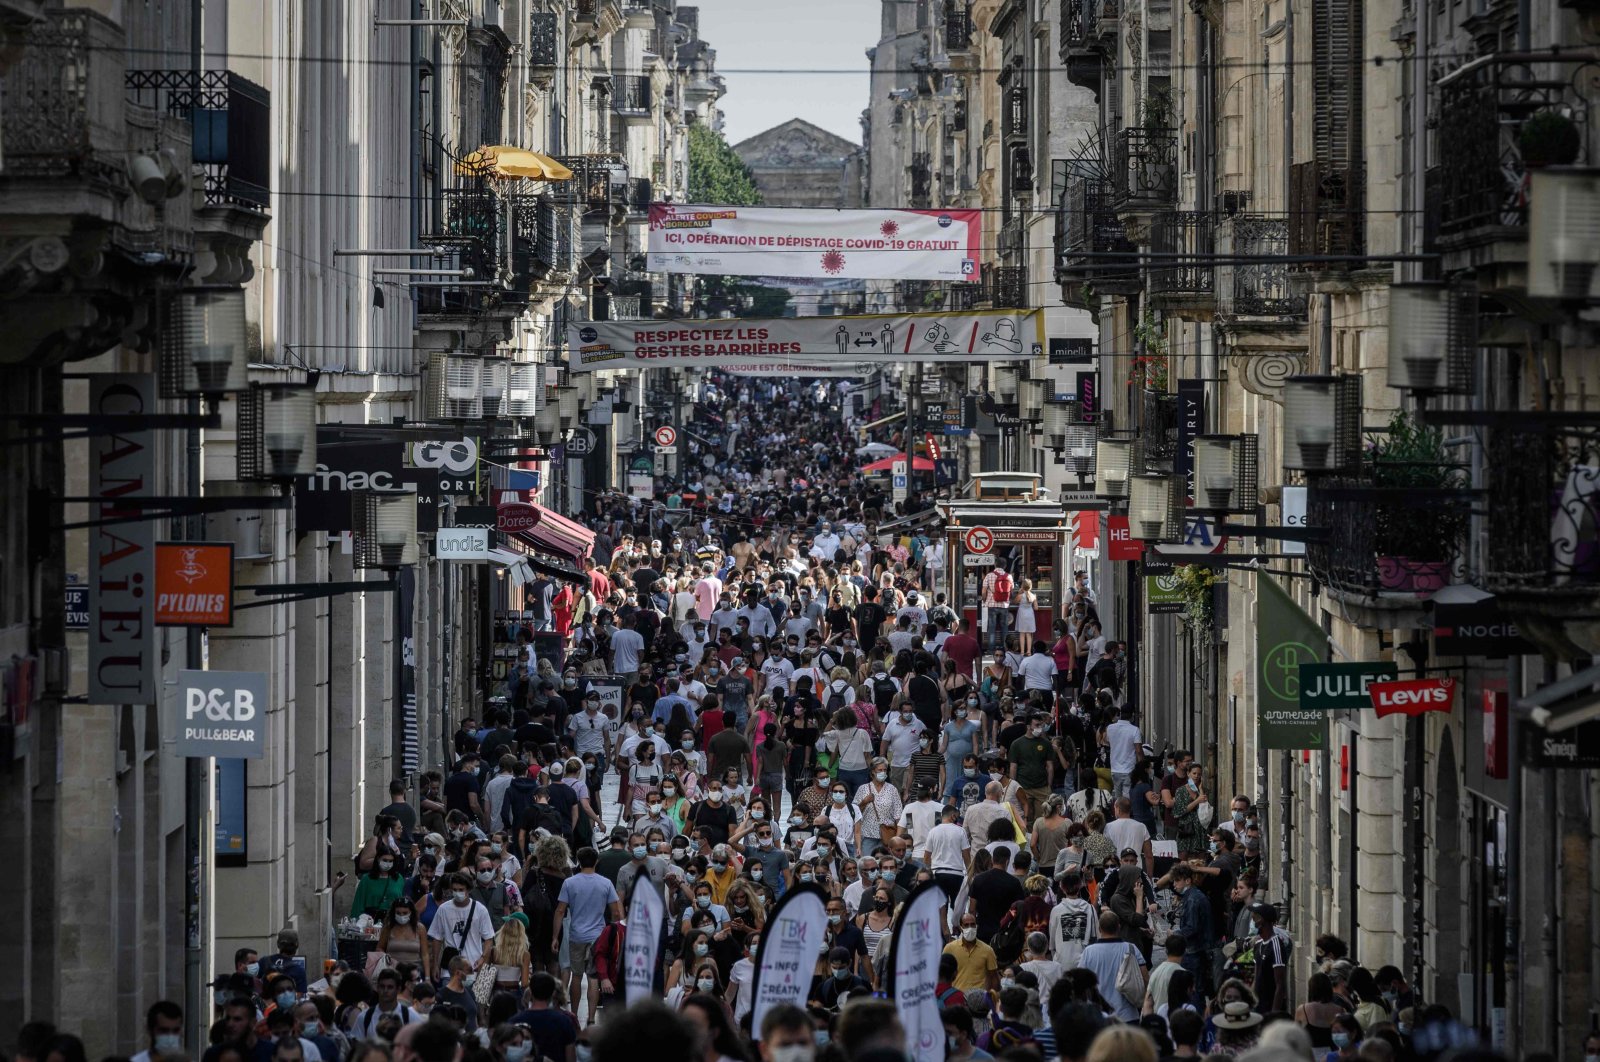 Pedestrians, some of them wearing protective face masks, walk along a street lined with shops, Bordeaux, France, Sept. 5, 2020. (AFP Photo)